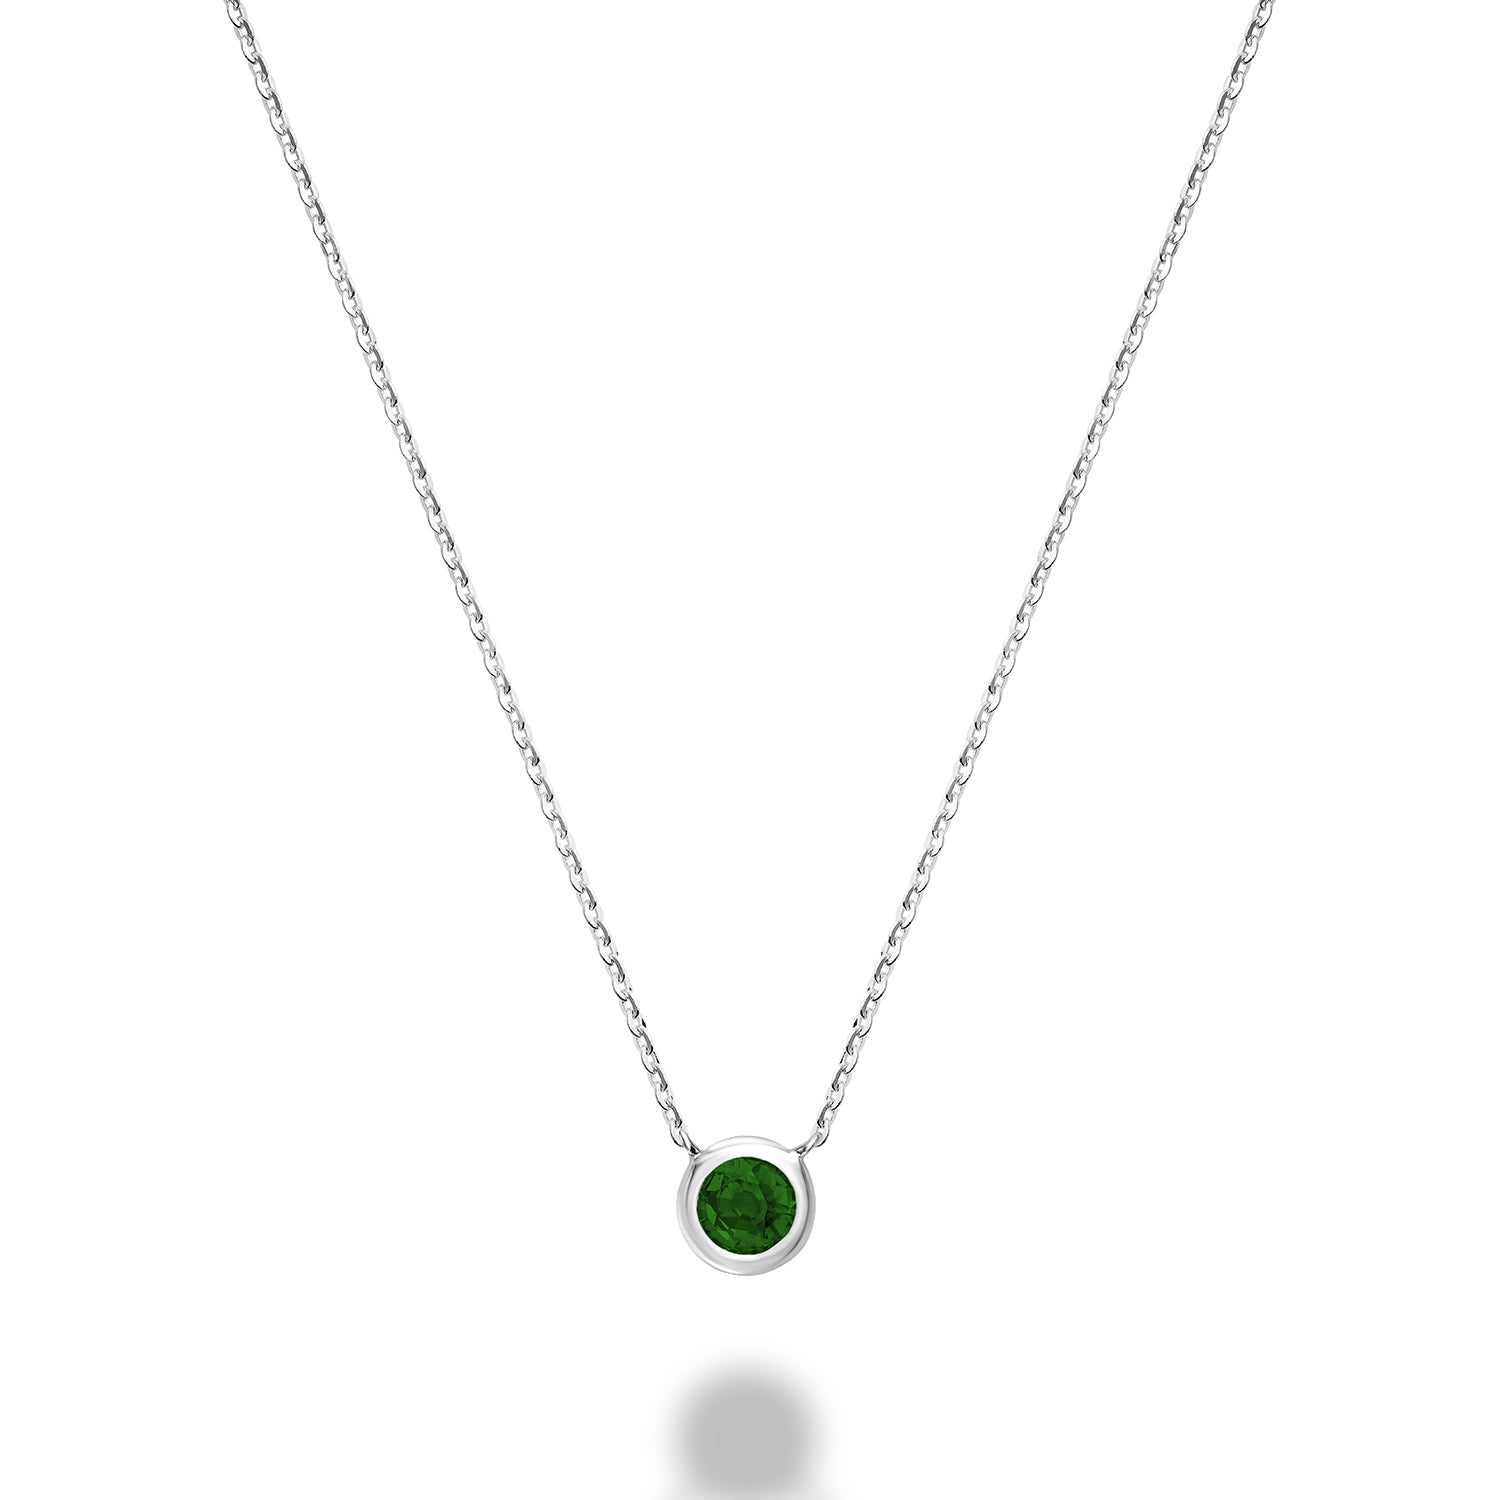 A close-up of a 10kt white gold emerald bezel set necklace. The necklace features a round emerald stone that is set in a gold bezel. The gold is a bright, white color.